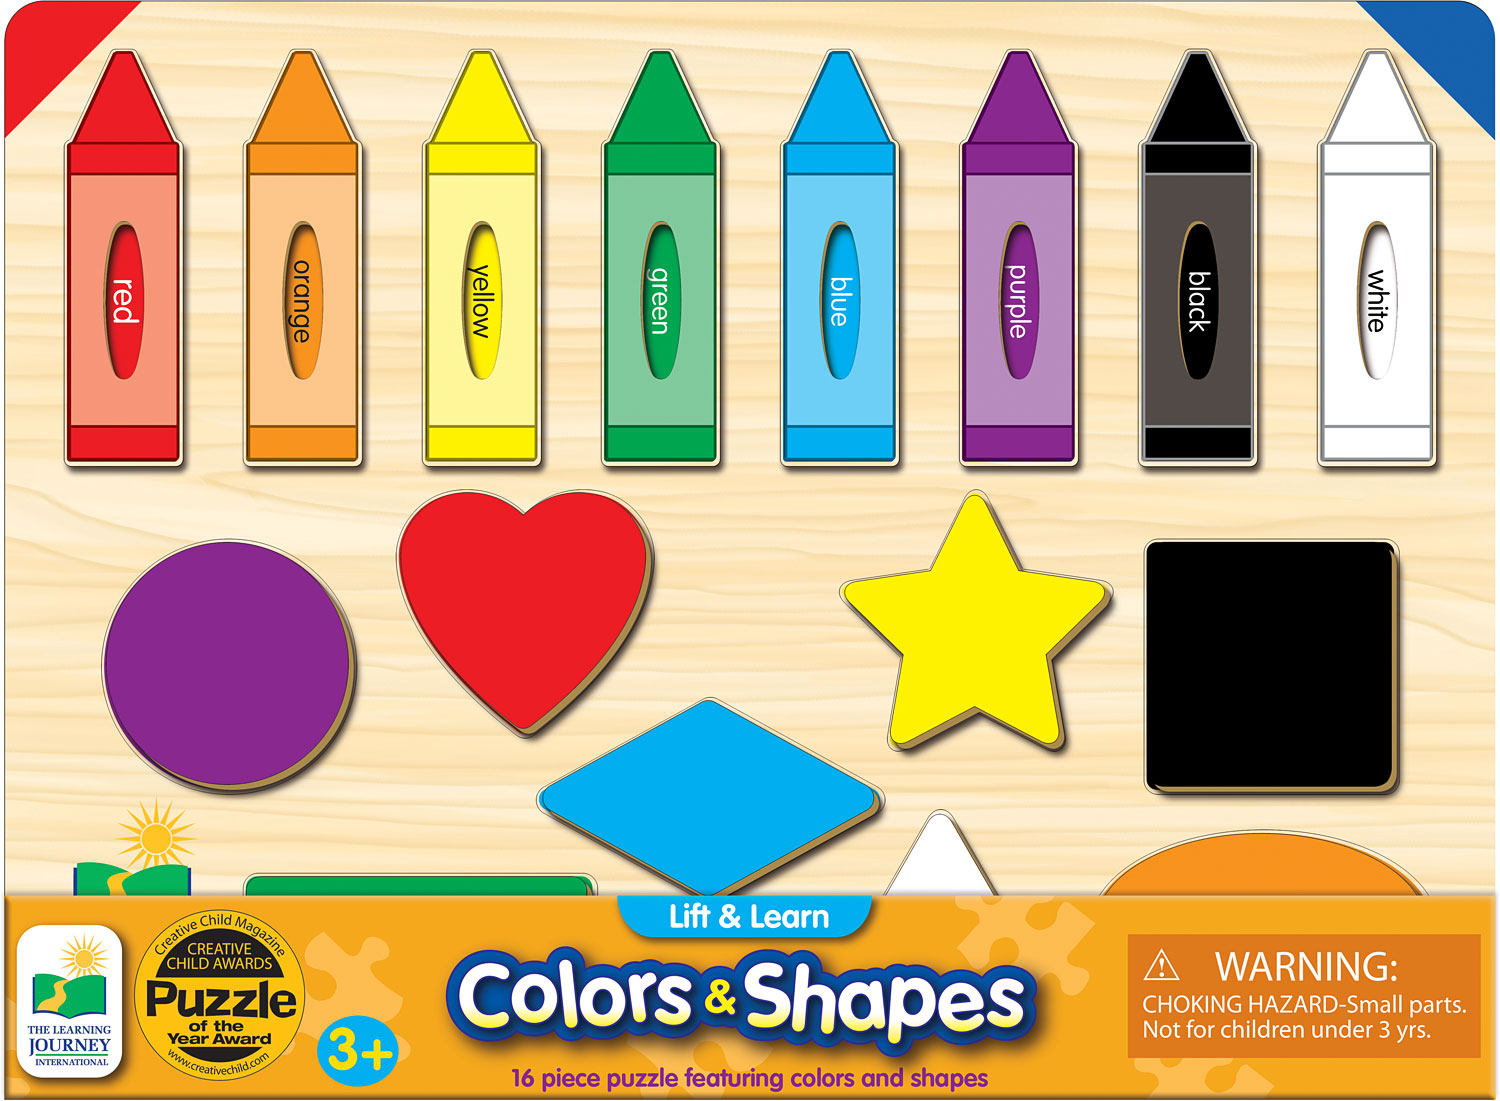 Lift & Learn Colors & Shapes 